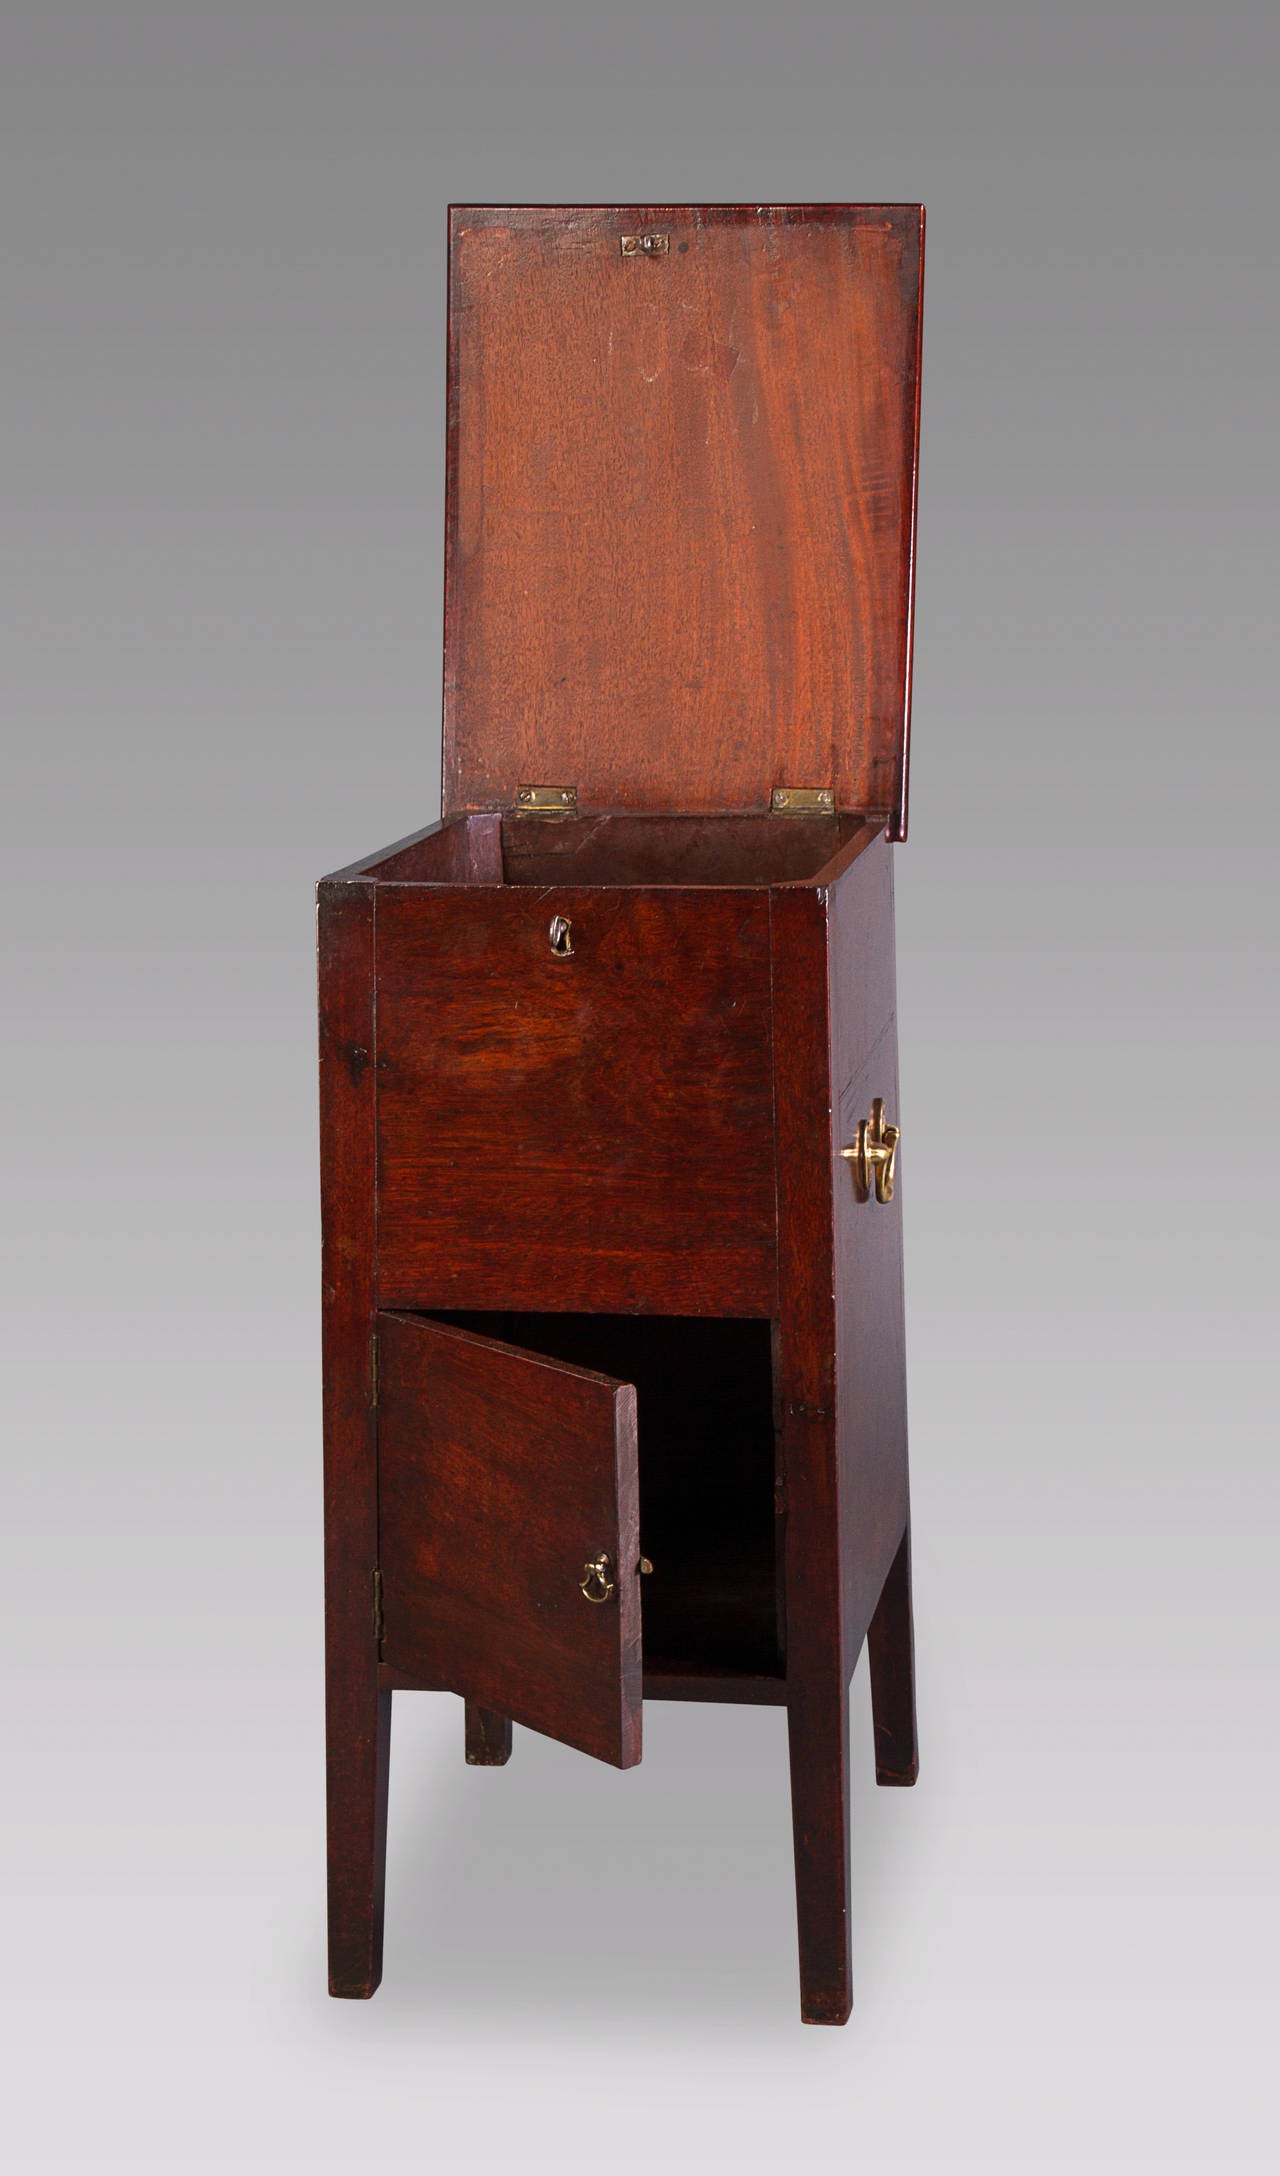 A very good mahogany cupboard from a very early period with great color and patina. This piece retains its original brass hardware and lock, and comes in a rare slightly tapered design. Its early origins are evident in the fact that the top lifts up